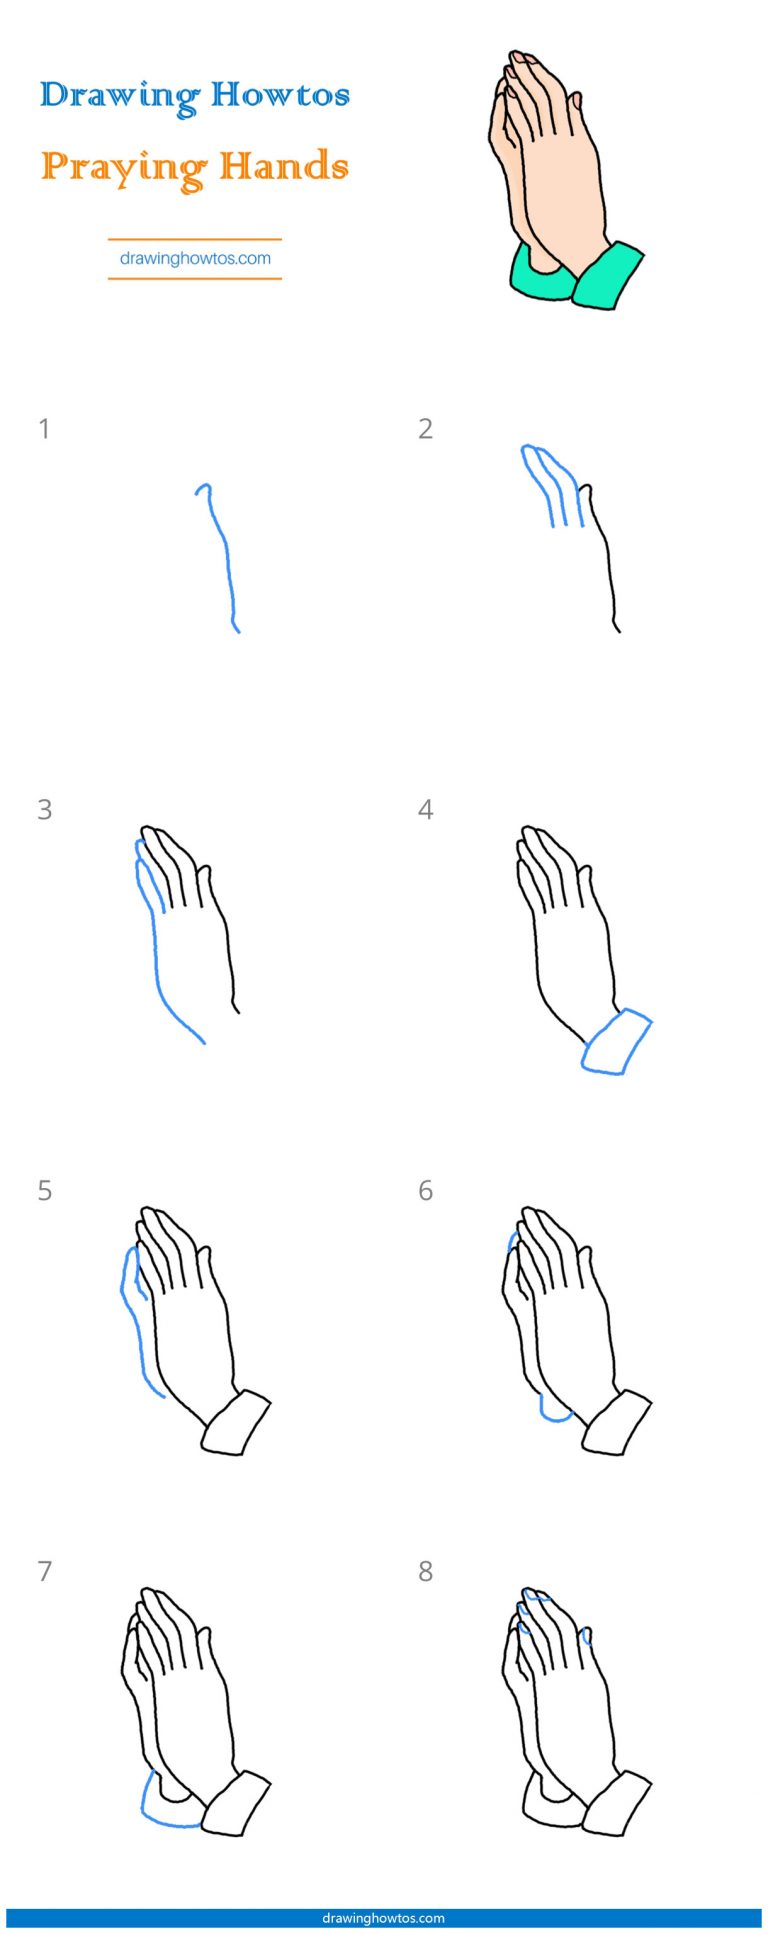 Great How To Draw Praying Hands Step By Step Easy of all time Check it out now 